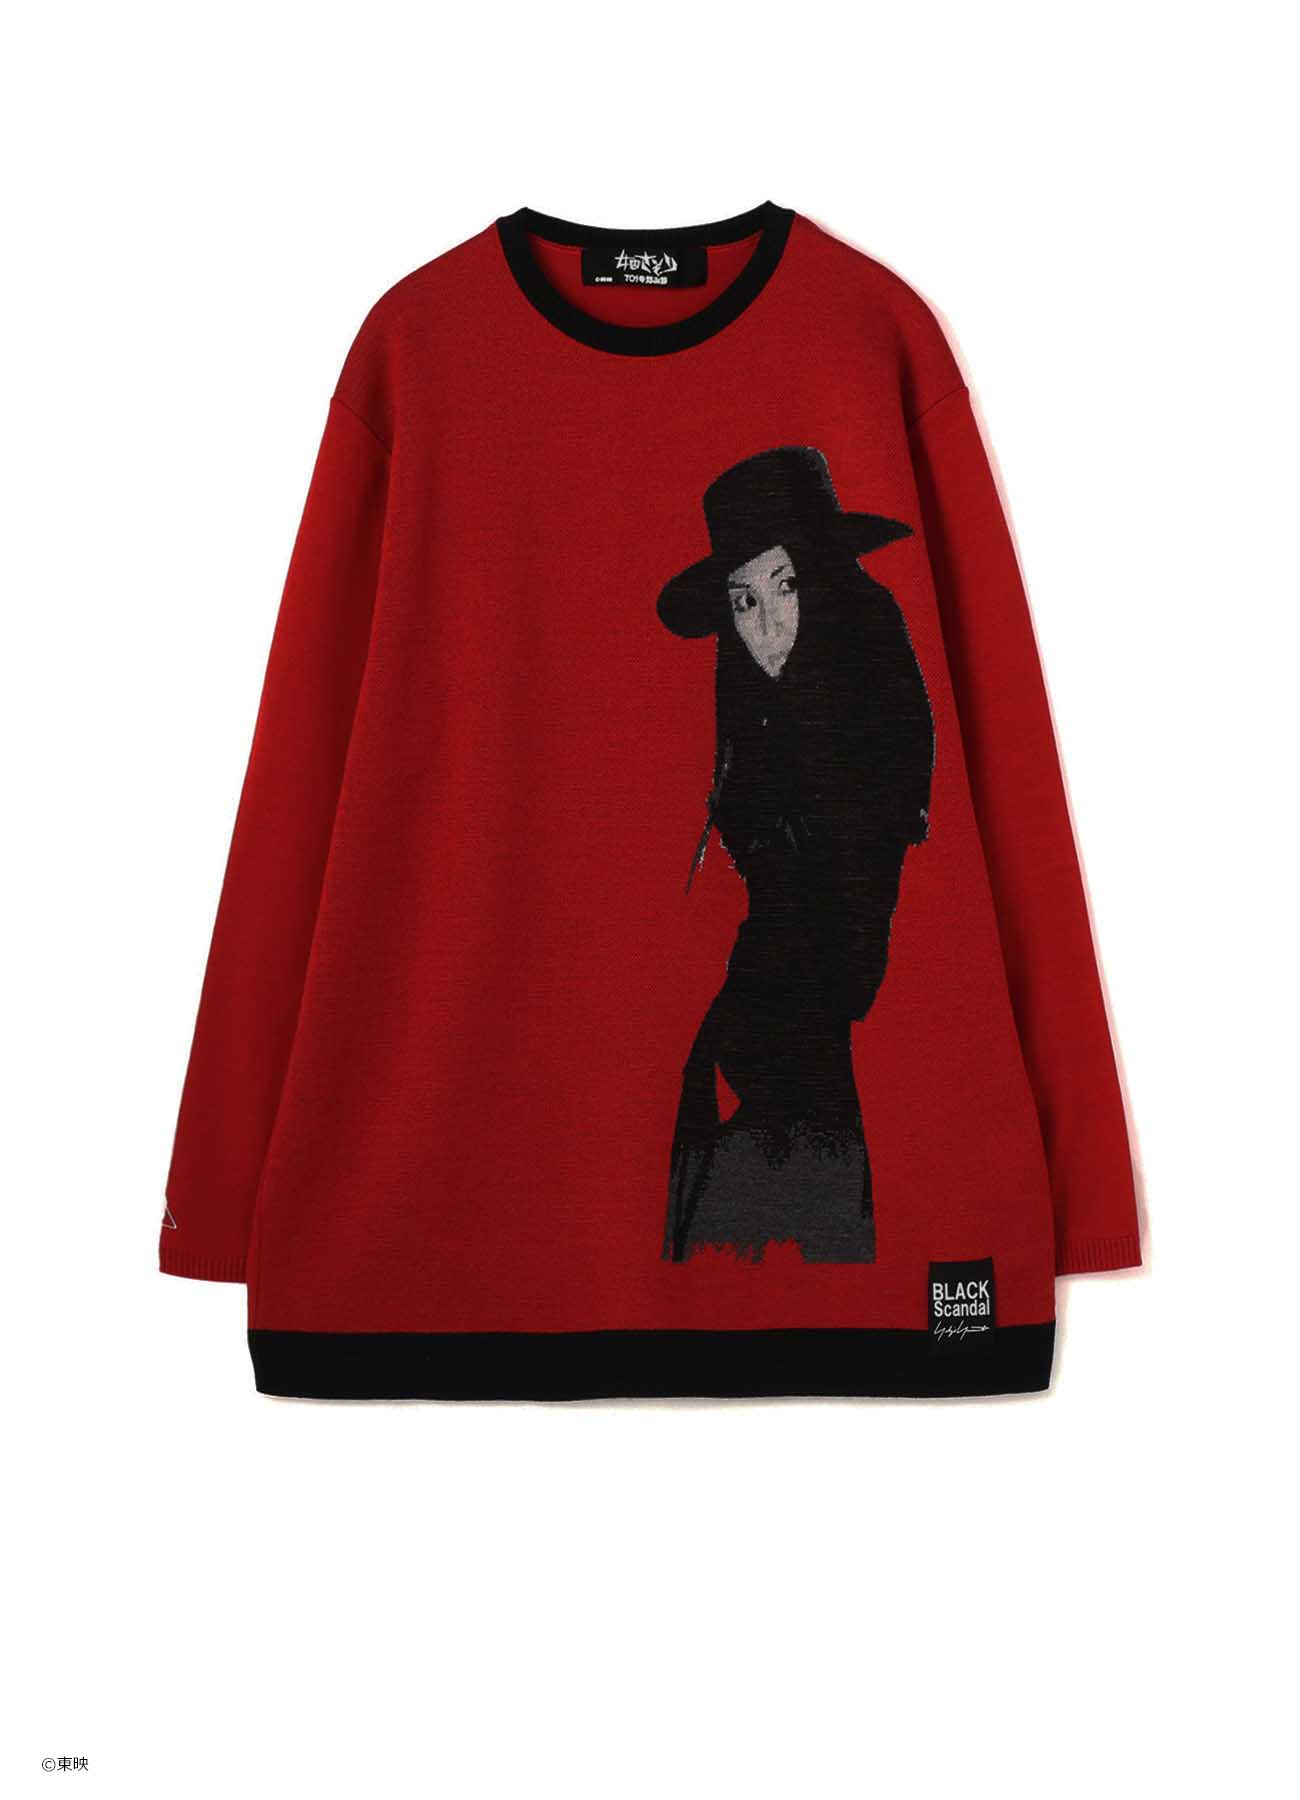 【5/24 10:00(JST) Release】FEMALE CONVICT: 701 SCORPION GRUDGE SONG CREW NECK KNIT